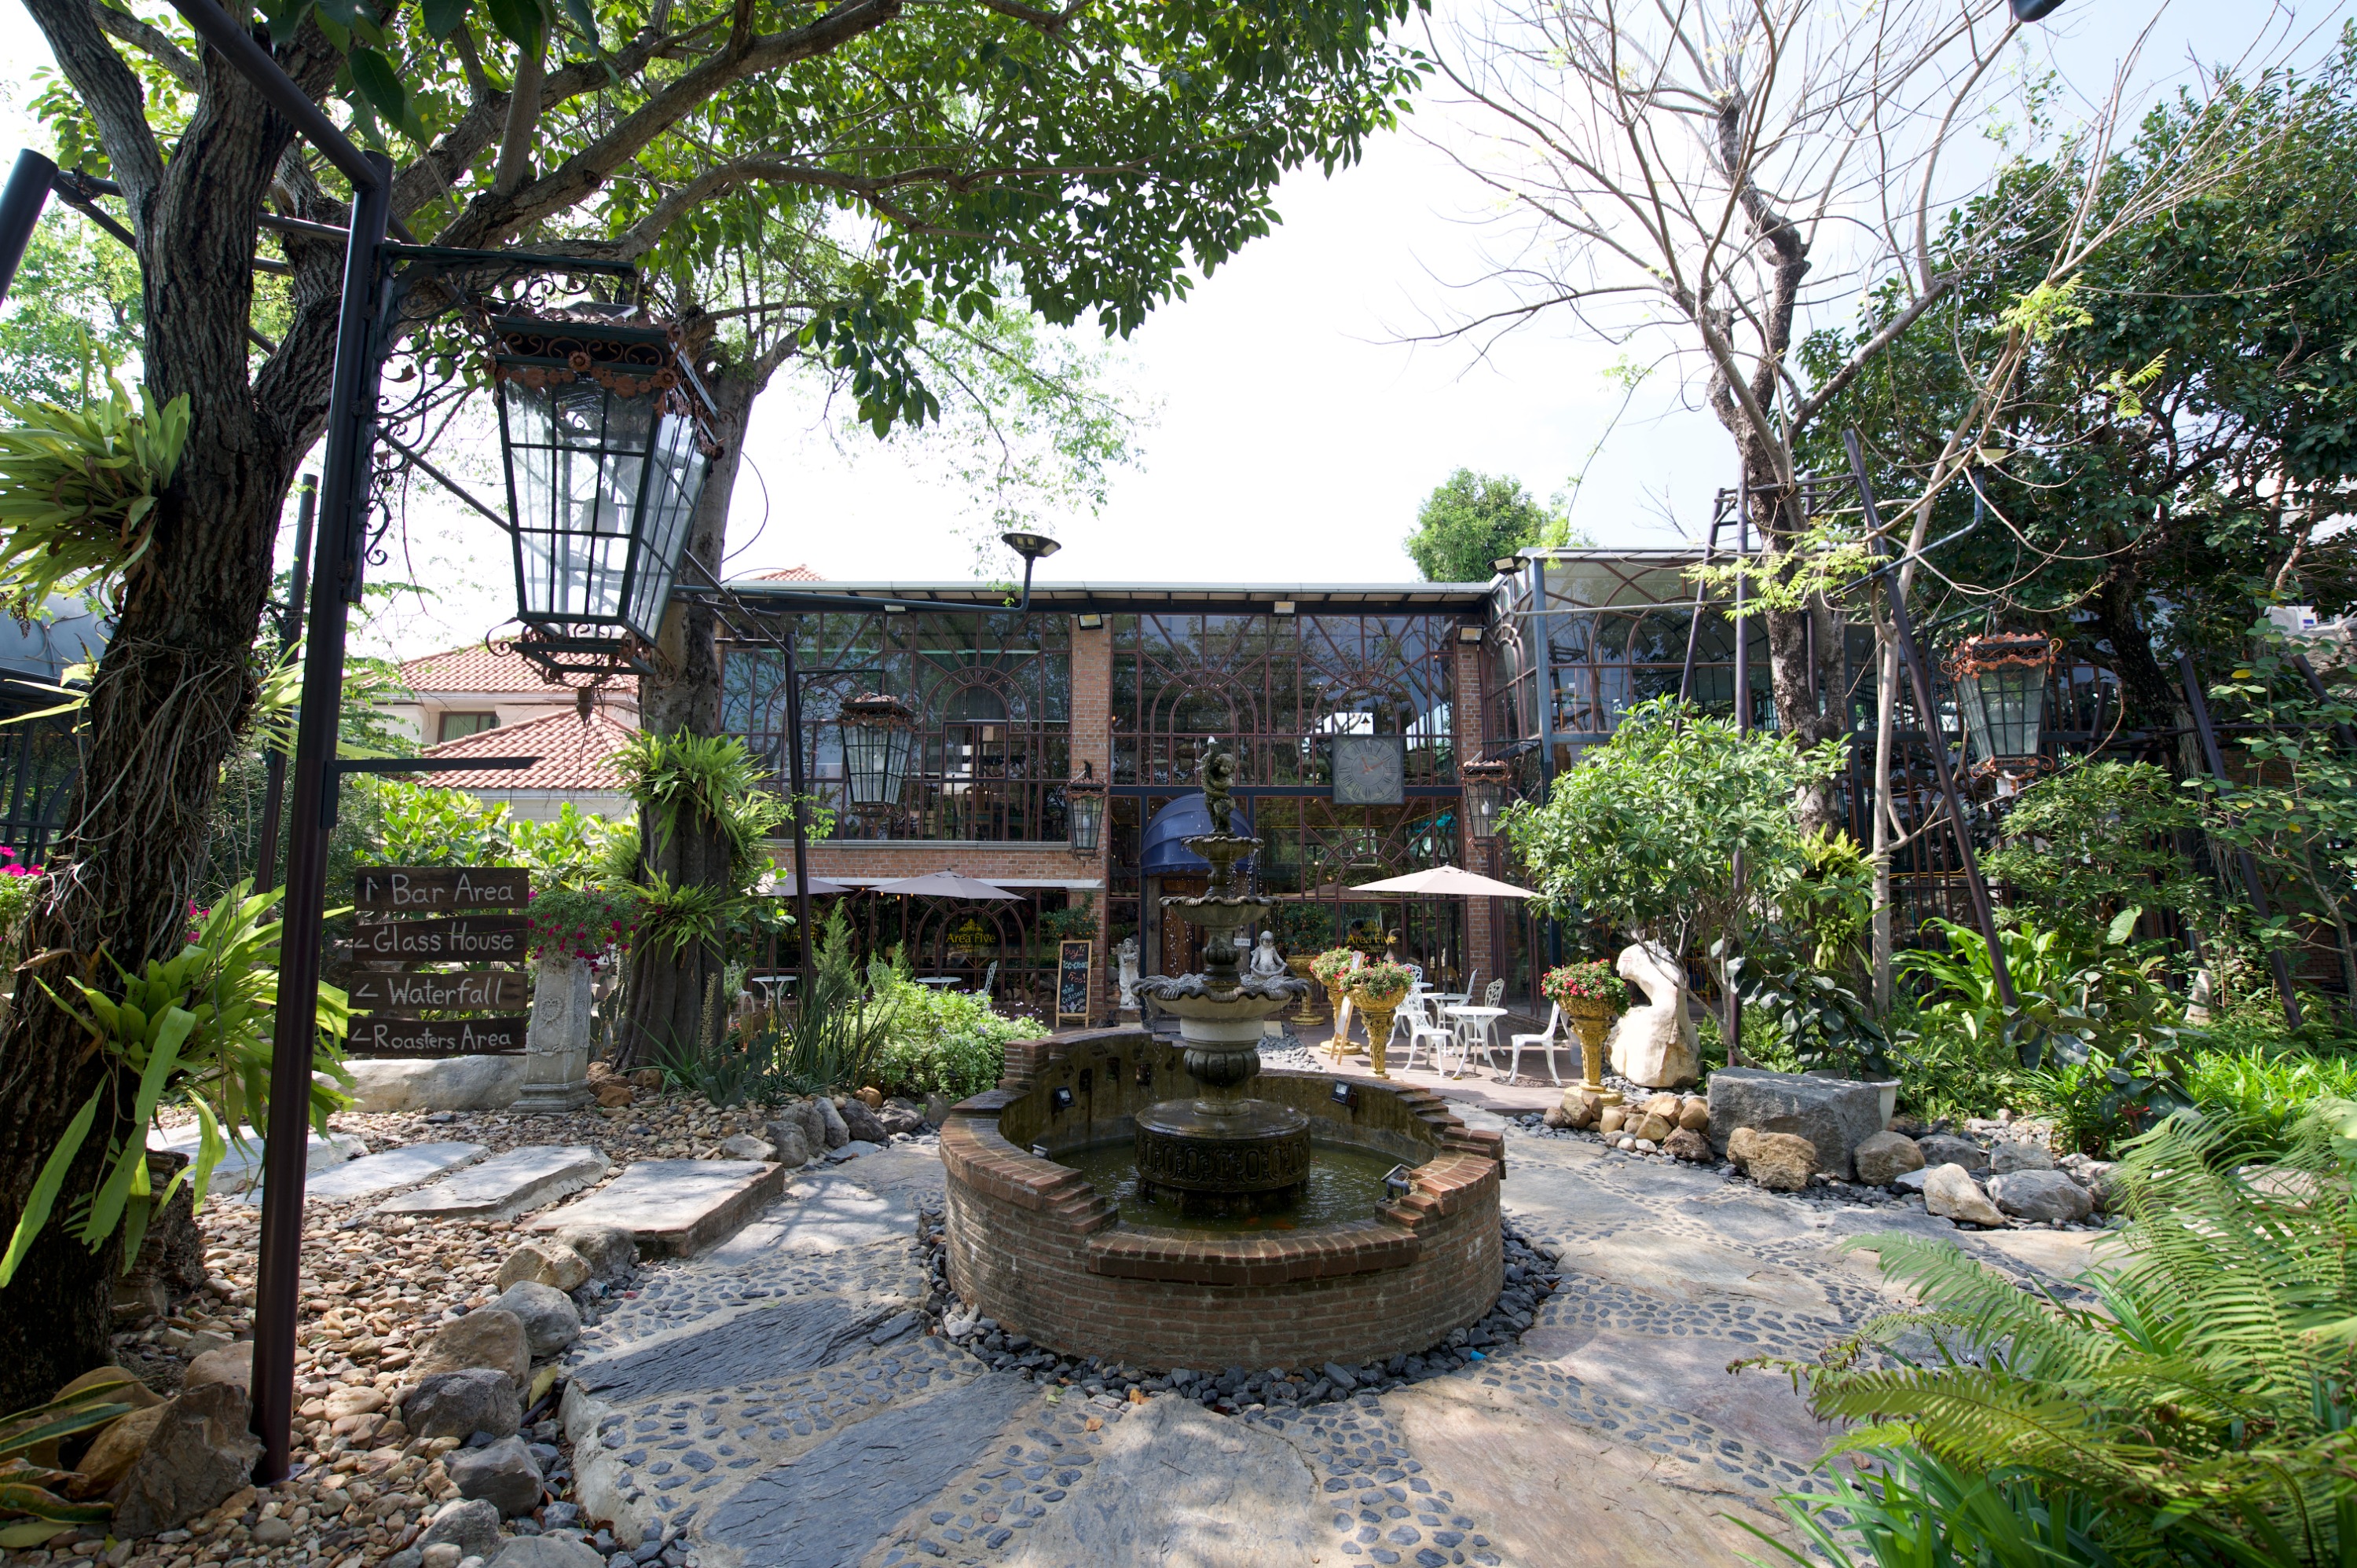 Area Five Cafe and Eatery（第五區咖啡館和餐館）